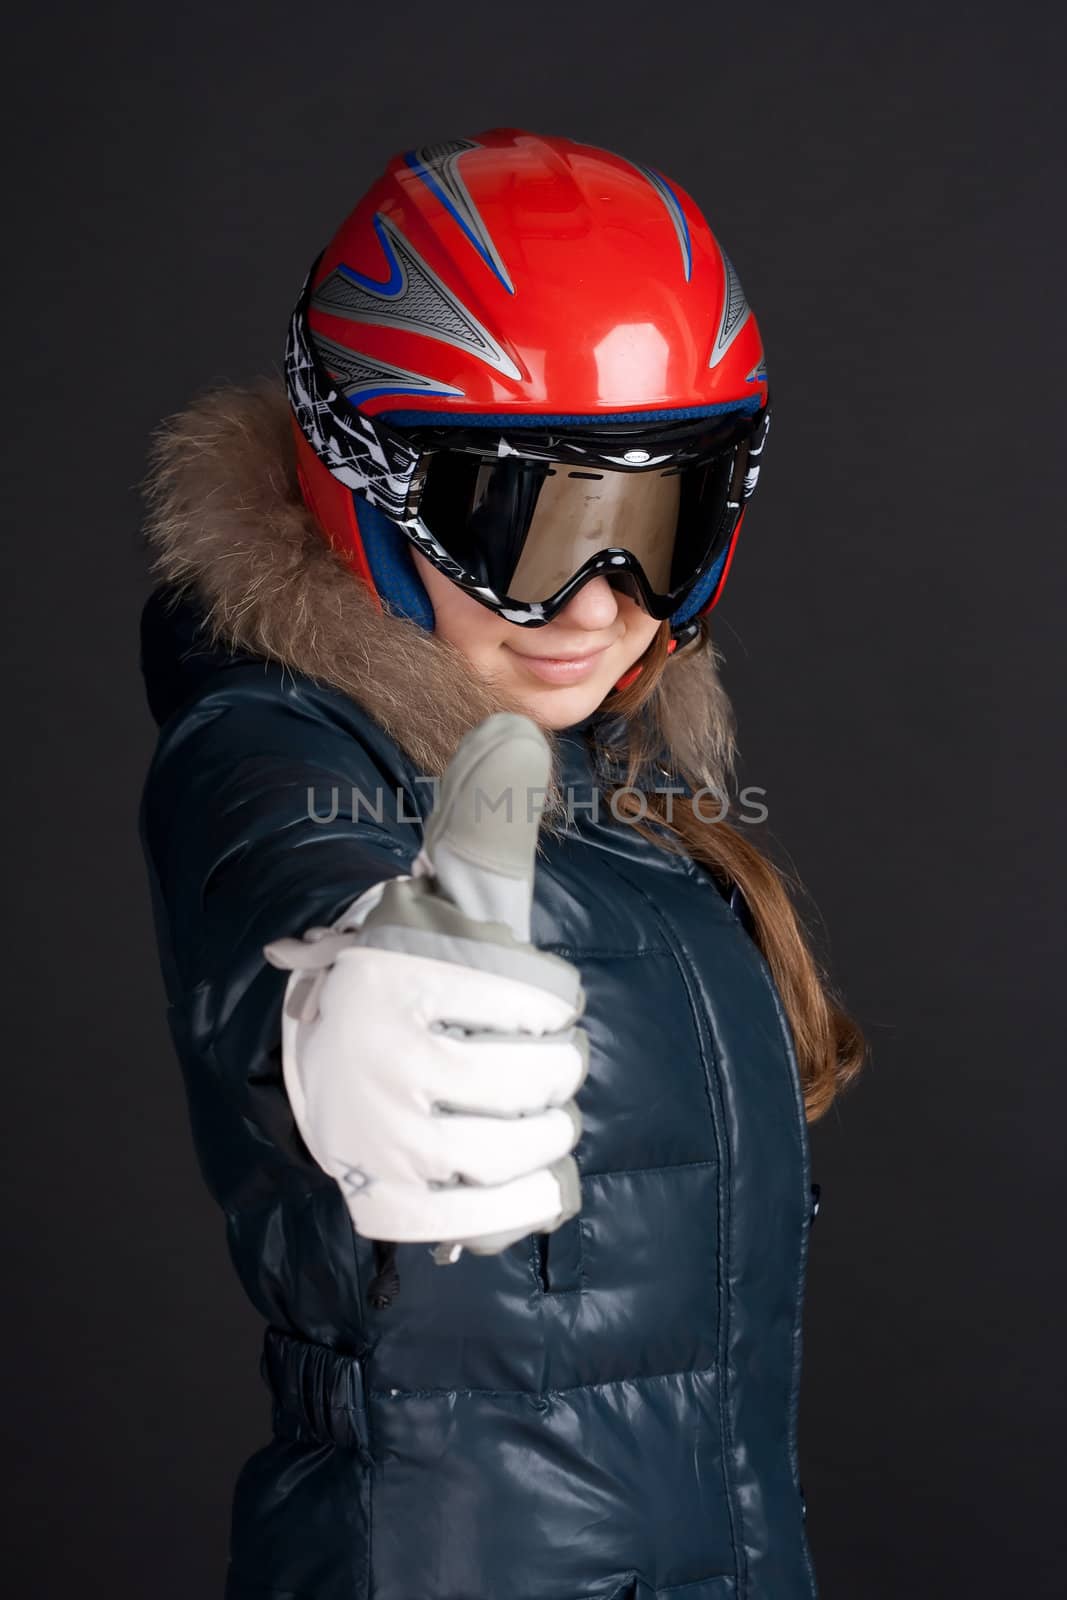 A girl in ski clothing raises a big thumbs up by victosha